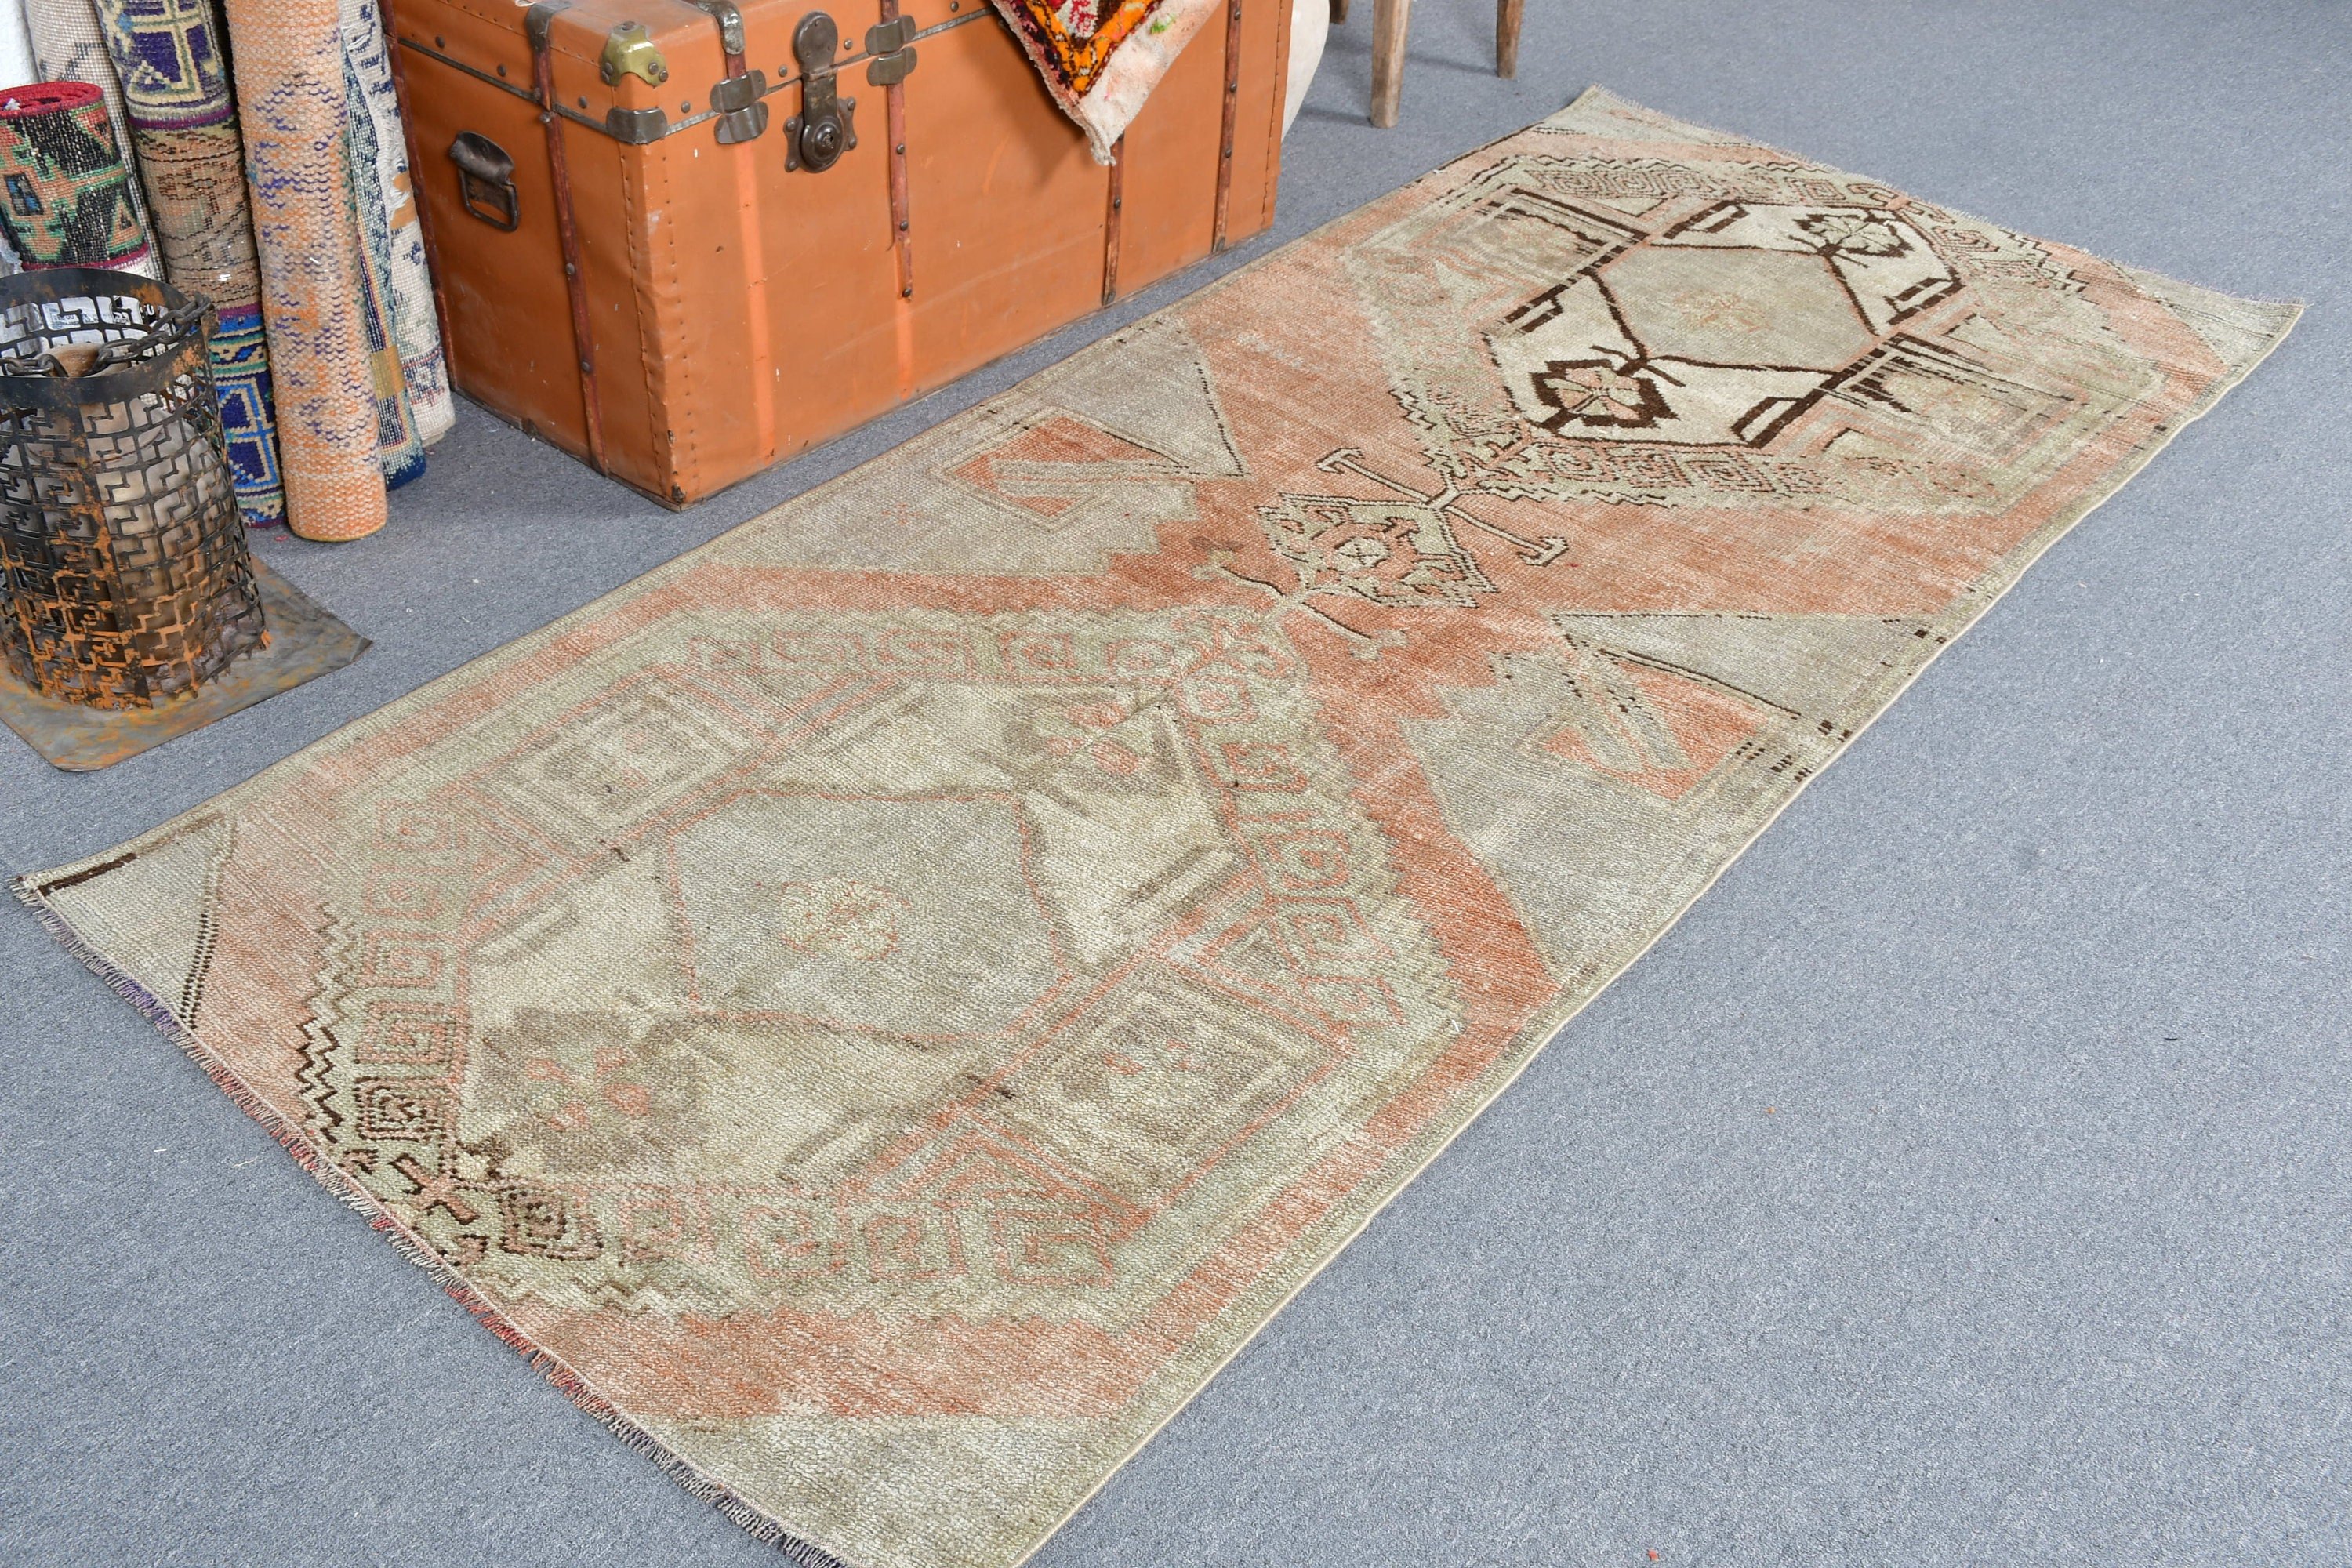 Turkish Rugs, Brown Anatolian Rugs, 3.3x7.9 ft Area Rug, Indoor Rugs, Anatolian Rugs, Vintage Rugs, Kitchen Rug, Rugs for Area, Old Rugs